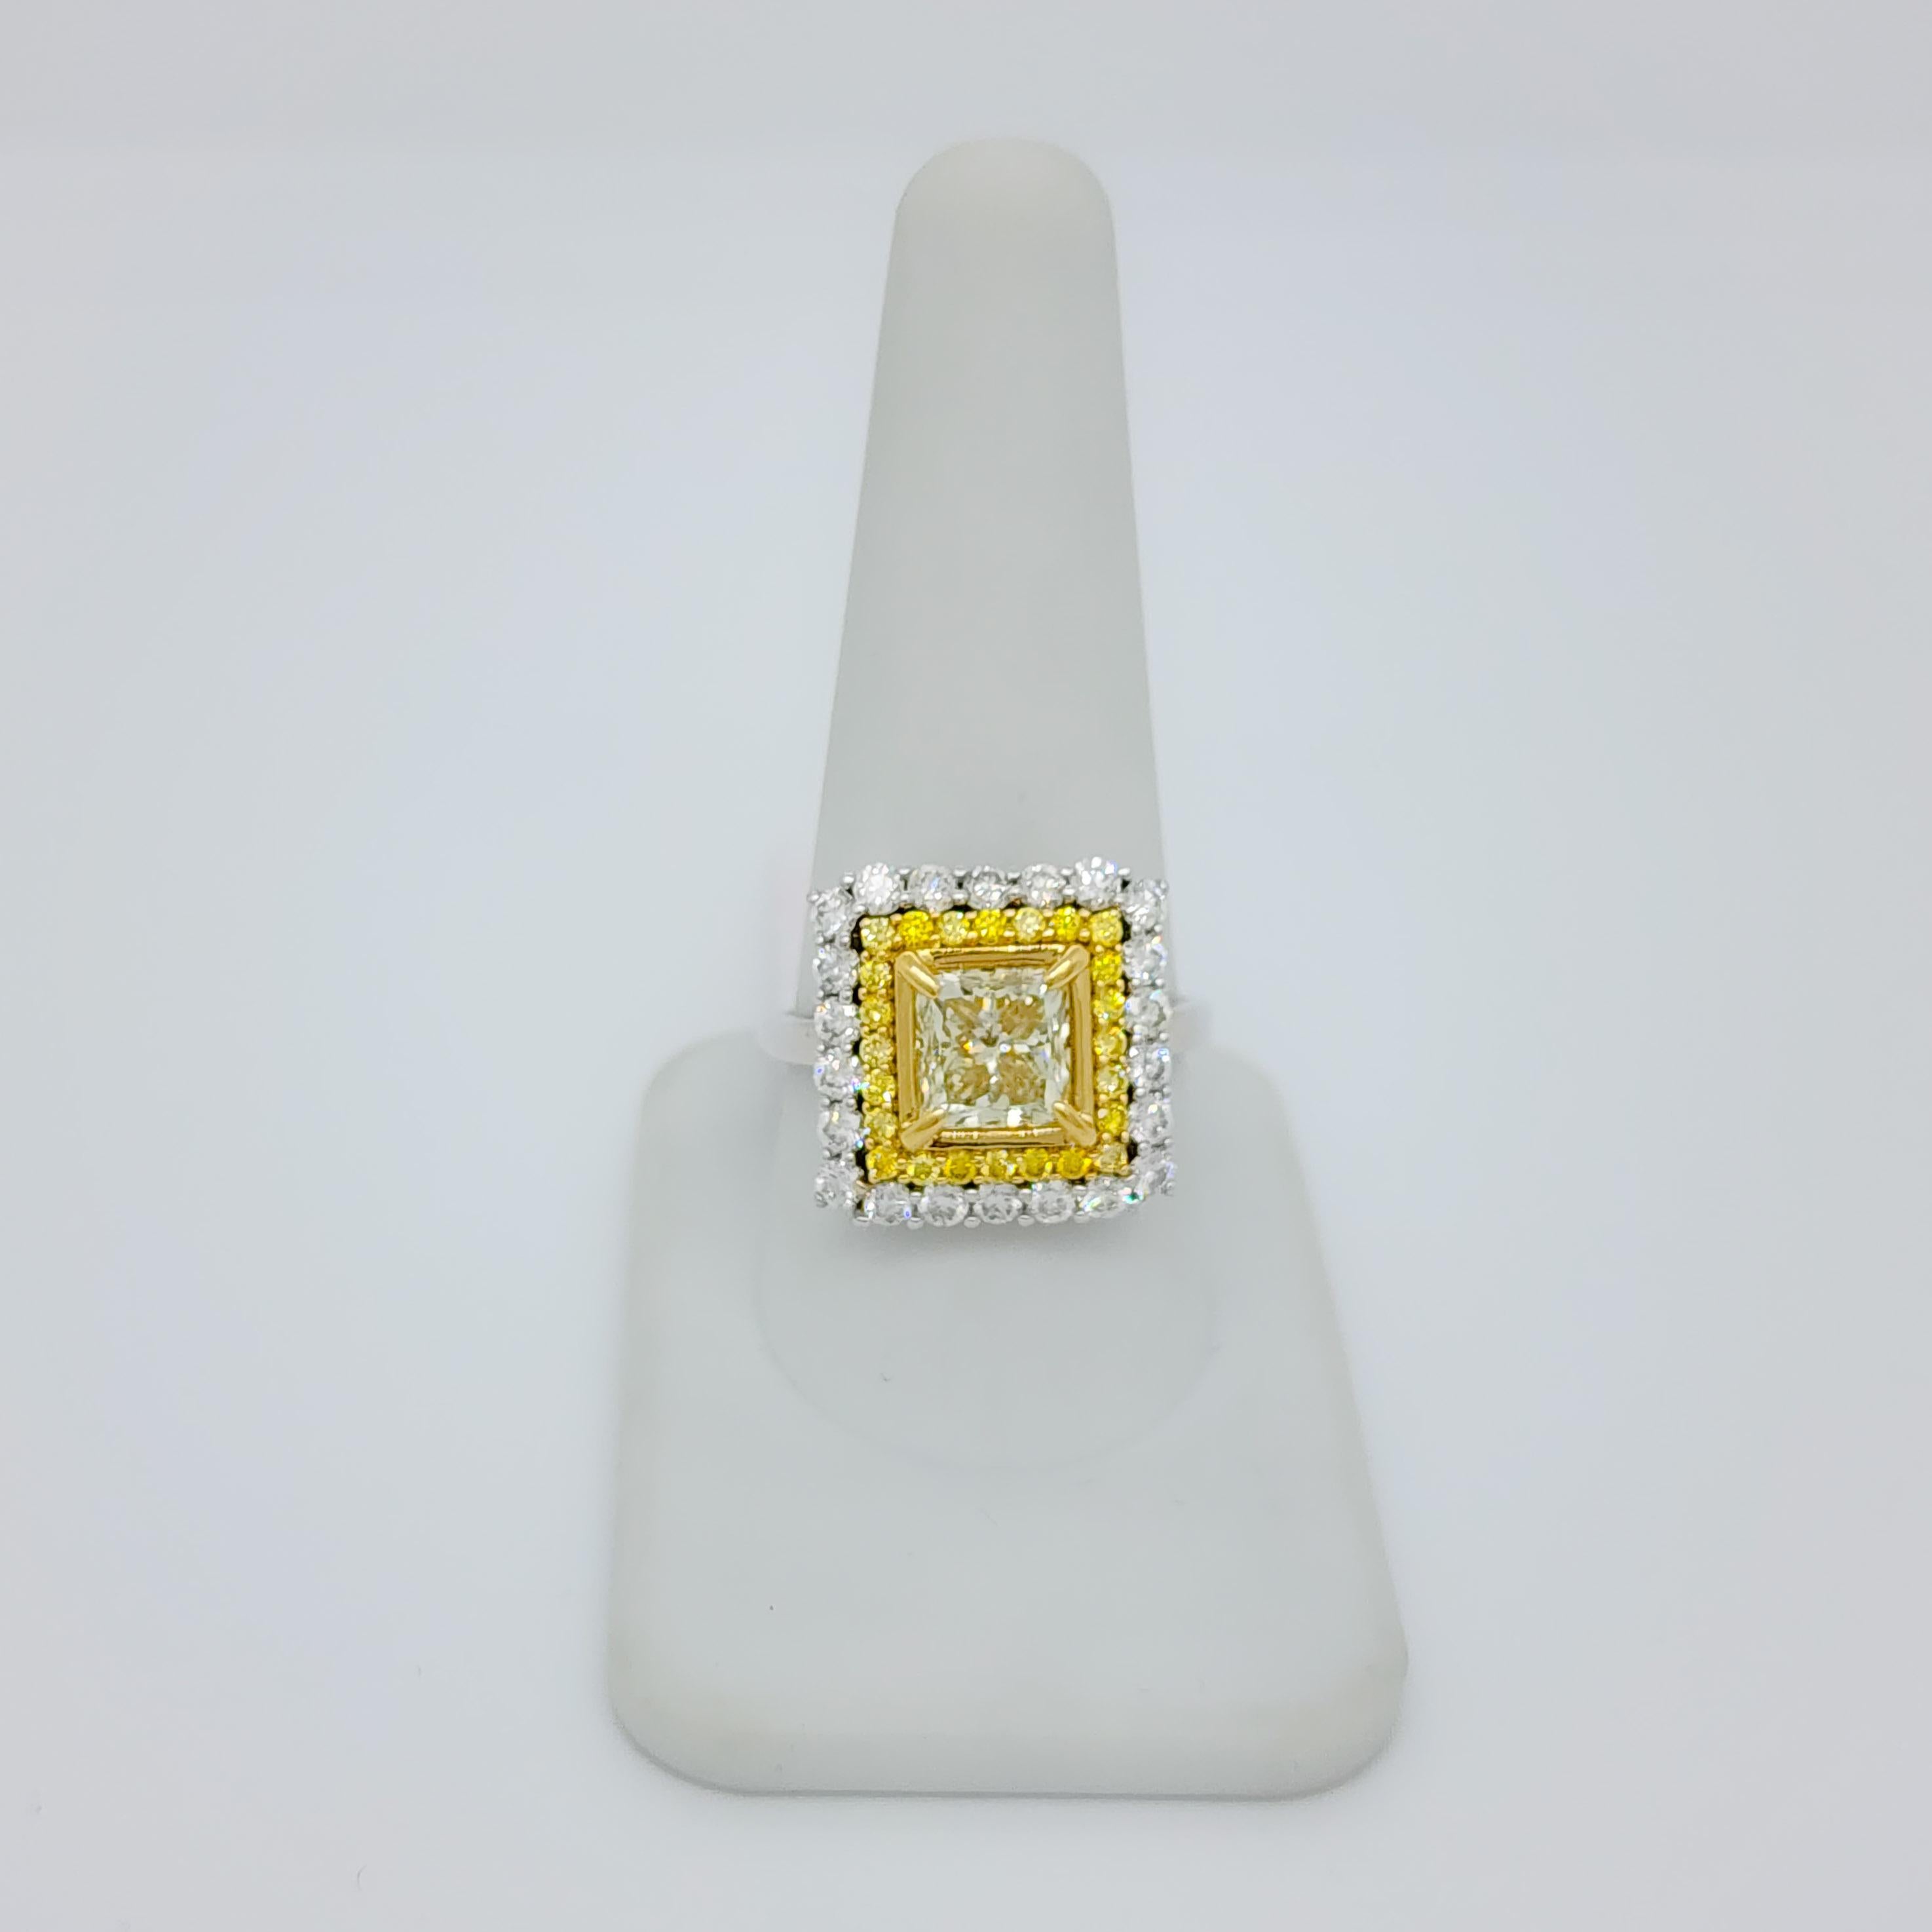 Princess Cut GIA Yellow and White Diamond Ring in 18k For Sale